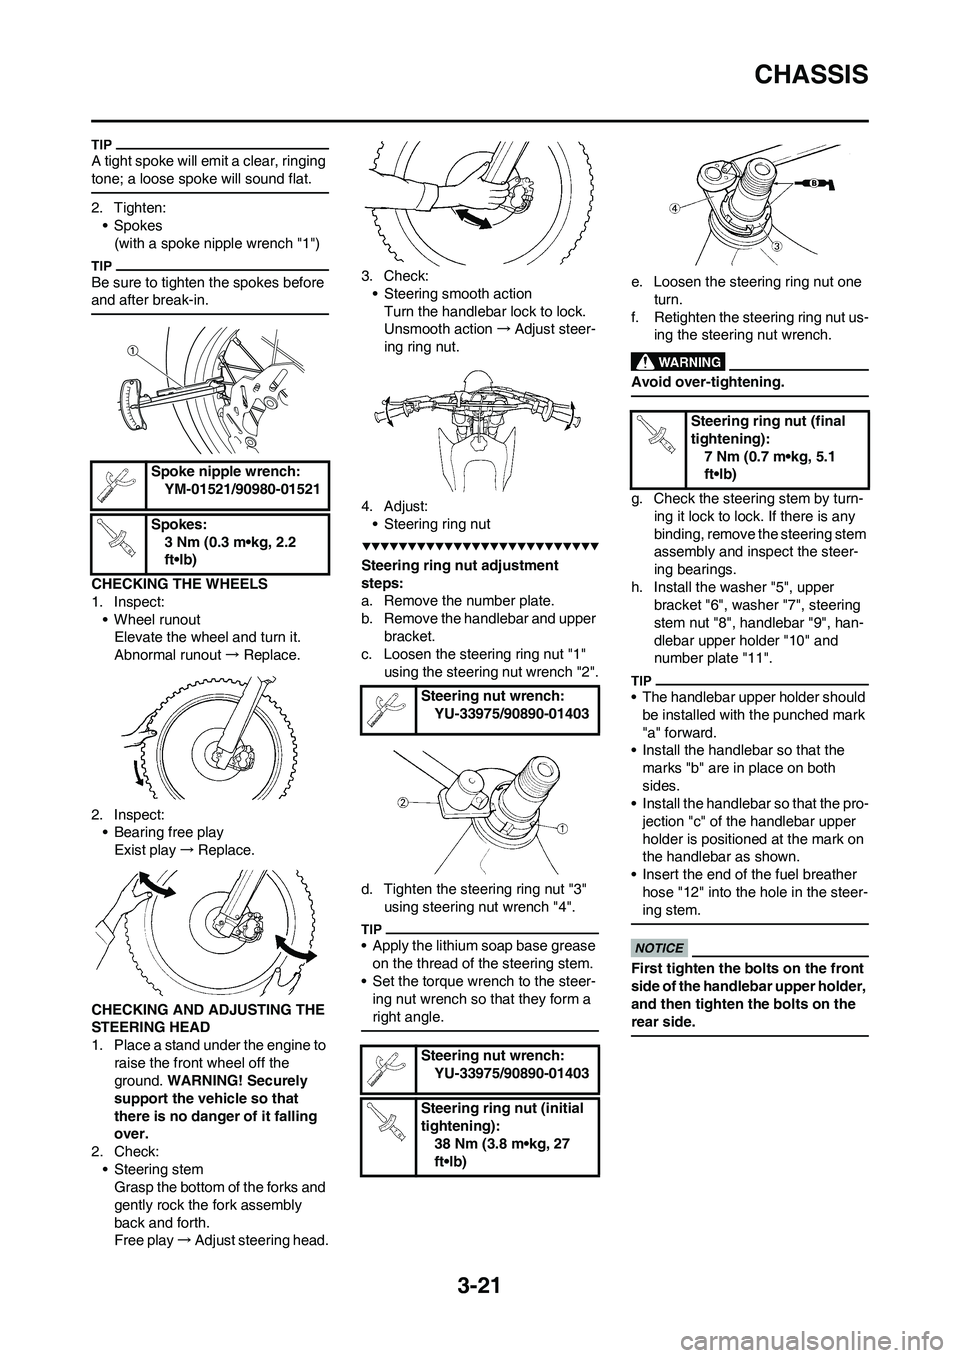 YAMAHA YZ450F 2009  Owners Manual 3-21
CHASSIS
A tight spoke will emit a clear, ringing 
tone; a loose spoke will sound flat.
2. Tighten:
• Spokes
(with a spoke nipple wrench "1")
Be sure to tighten the spokes before 
and after brea